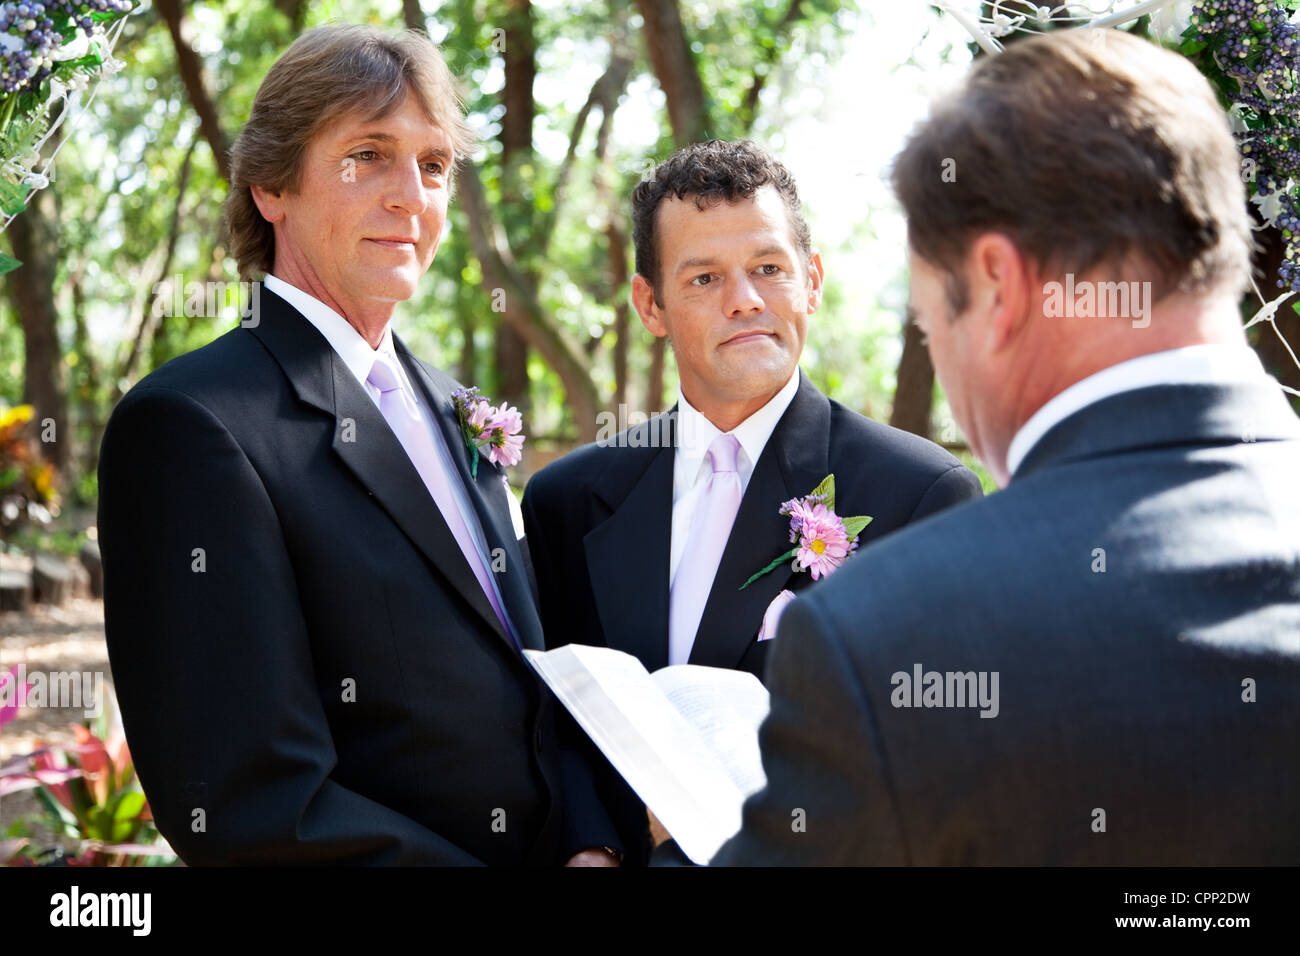 Handsome gay male couple getting married by a minister in beautiful outdoor setting.  Stock Photo